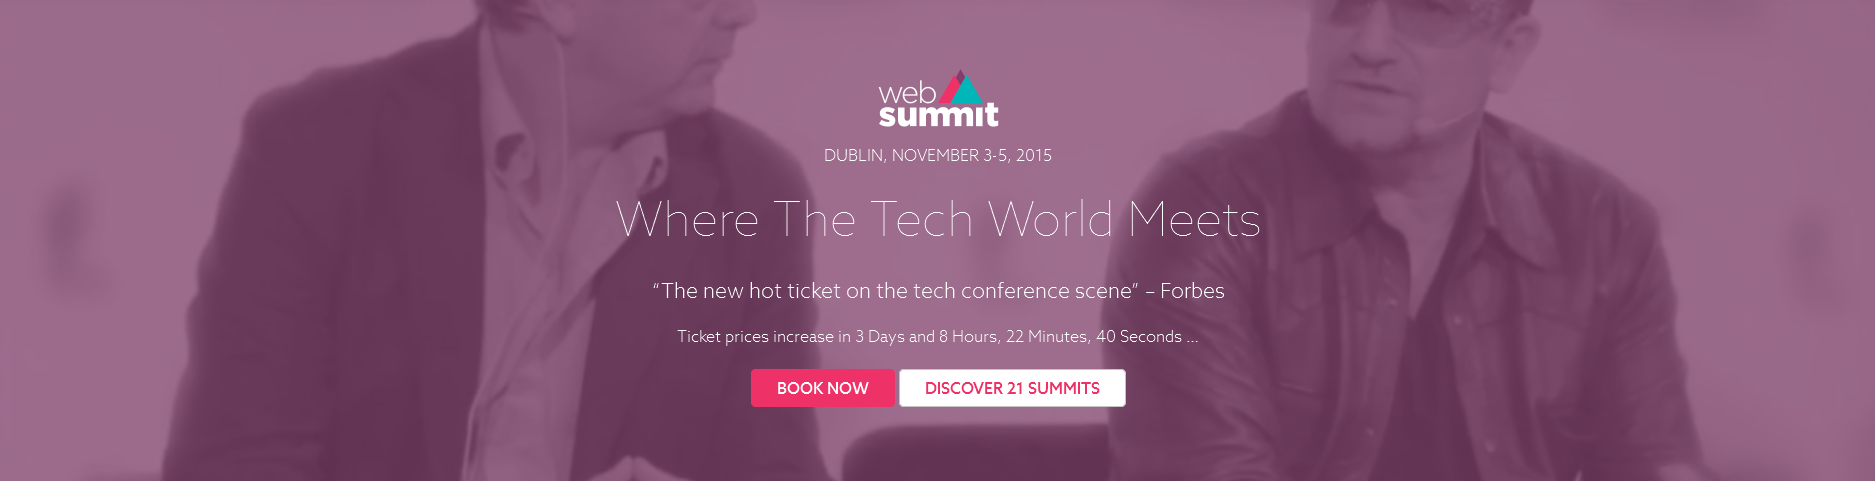 Web Summit 2015 Overview